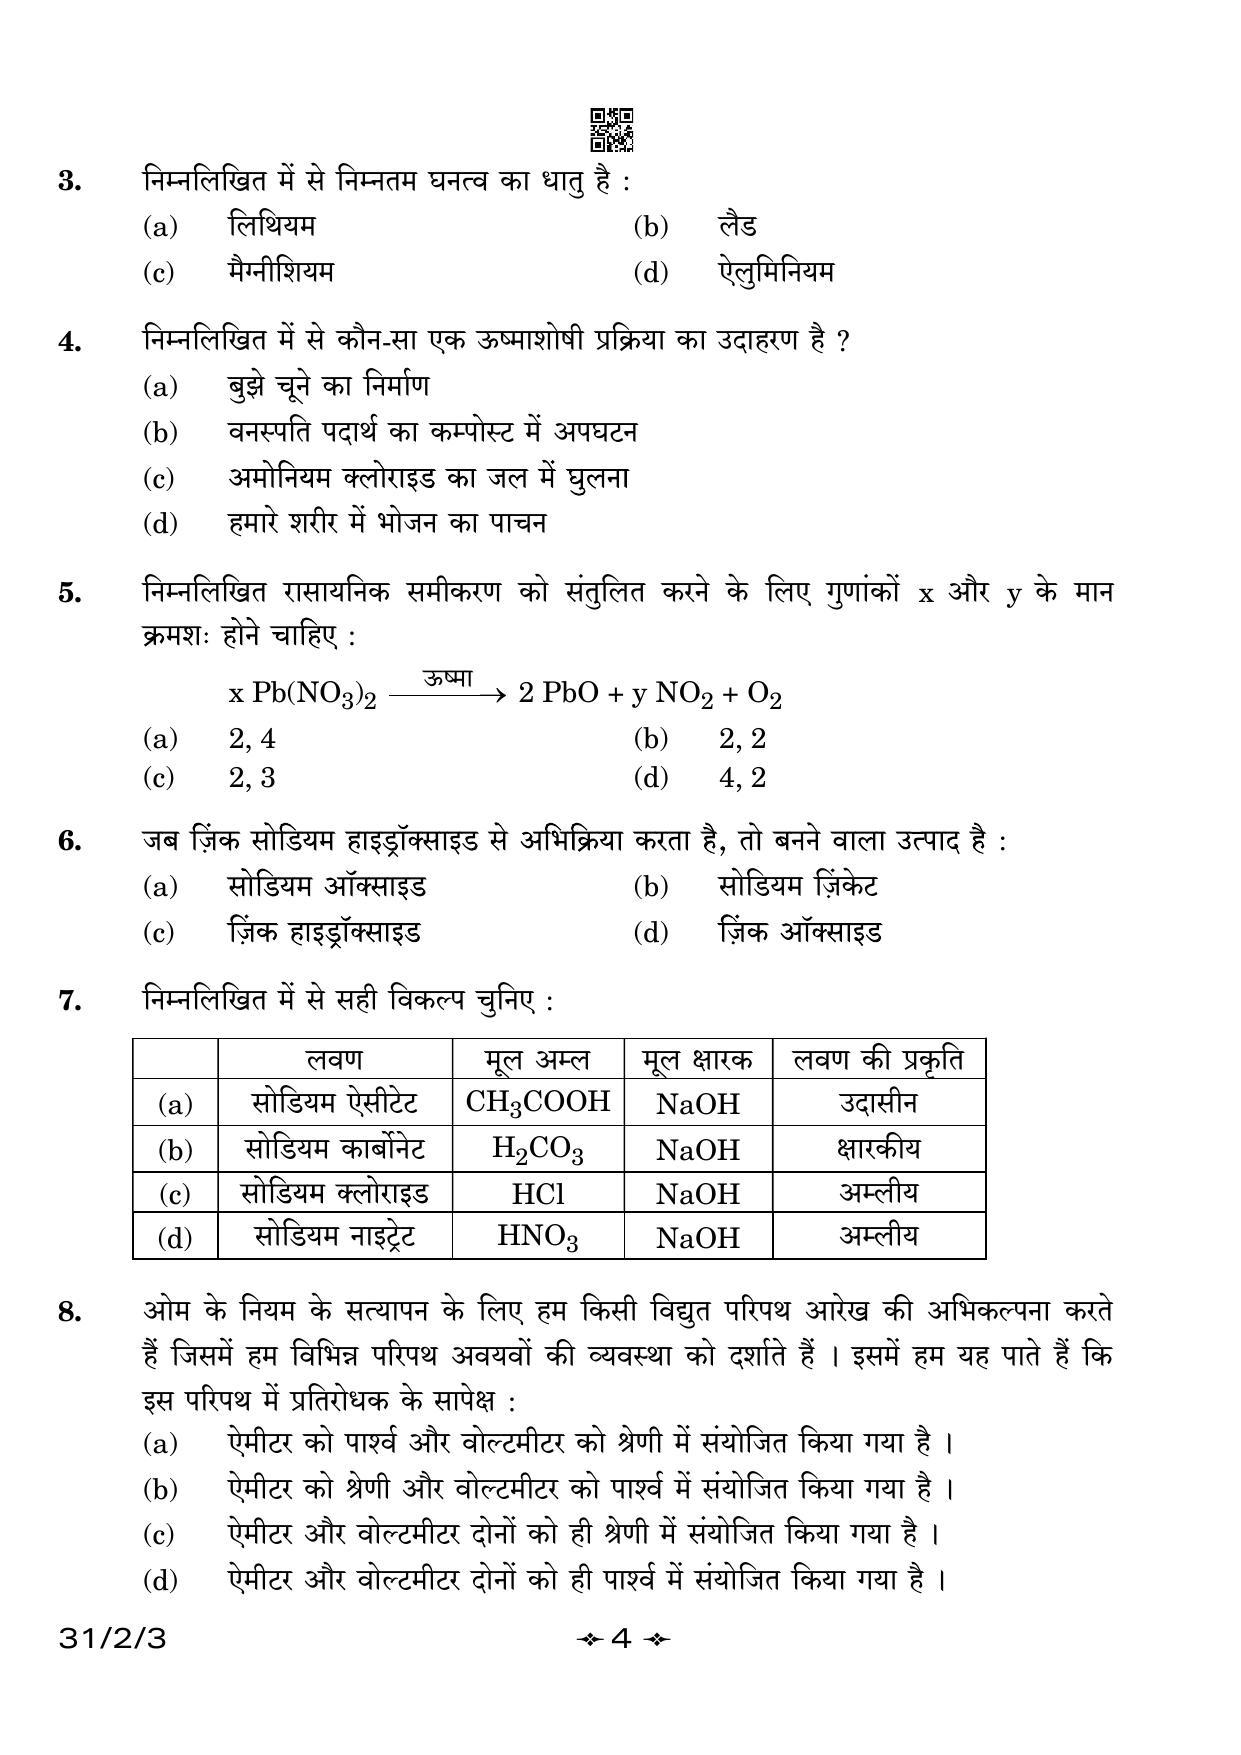 CBSE Class 10 31-2-3 Science 2023 Question Paper - Page 4